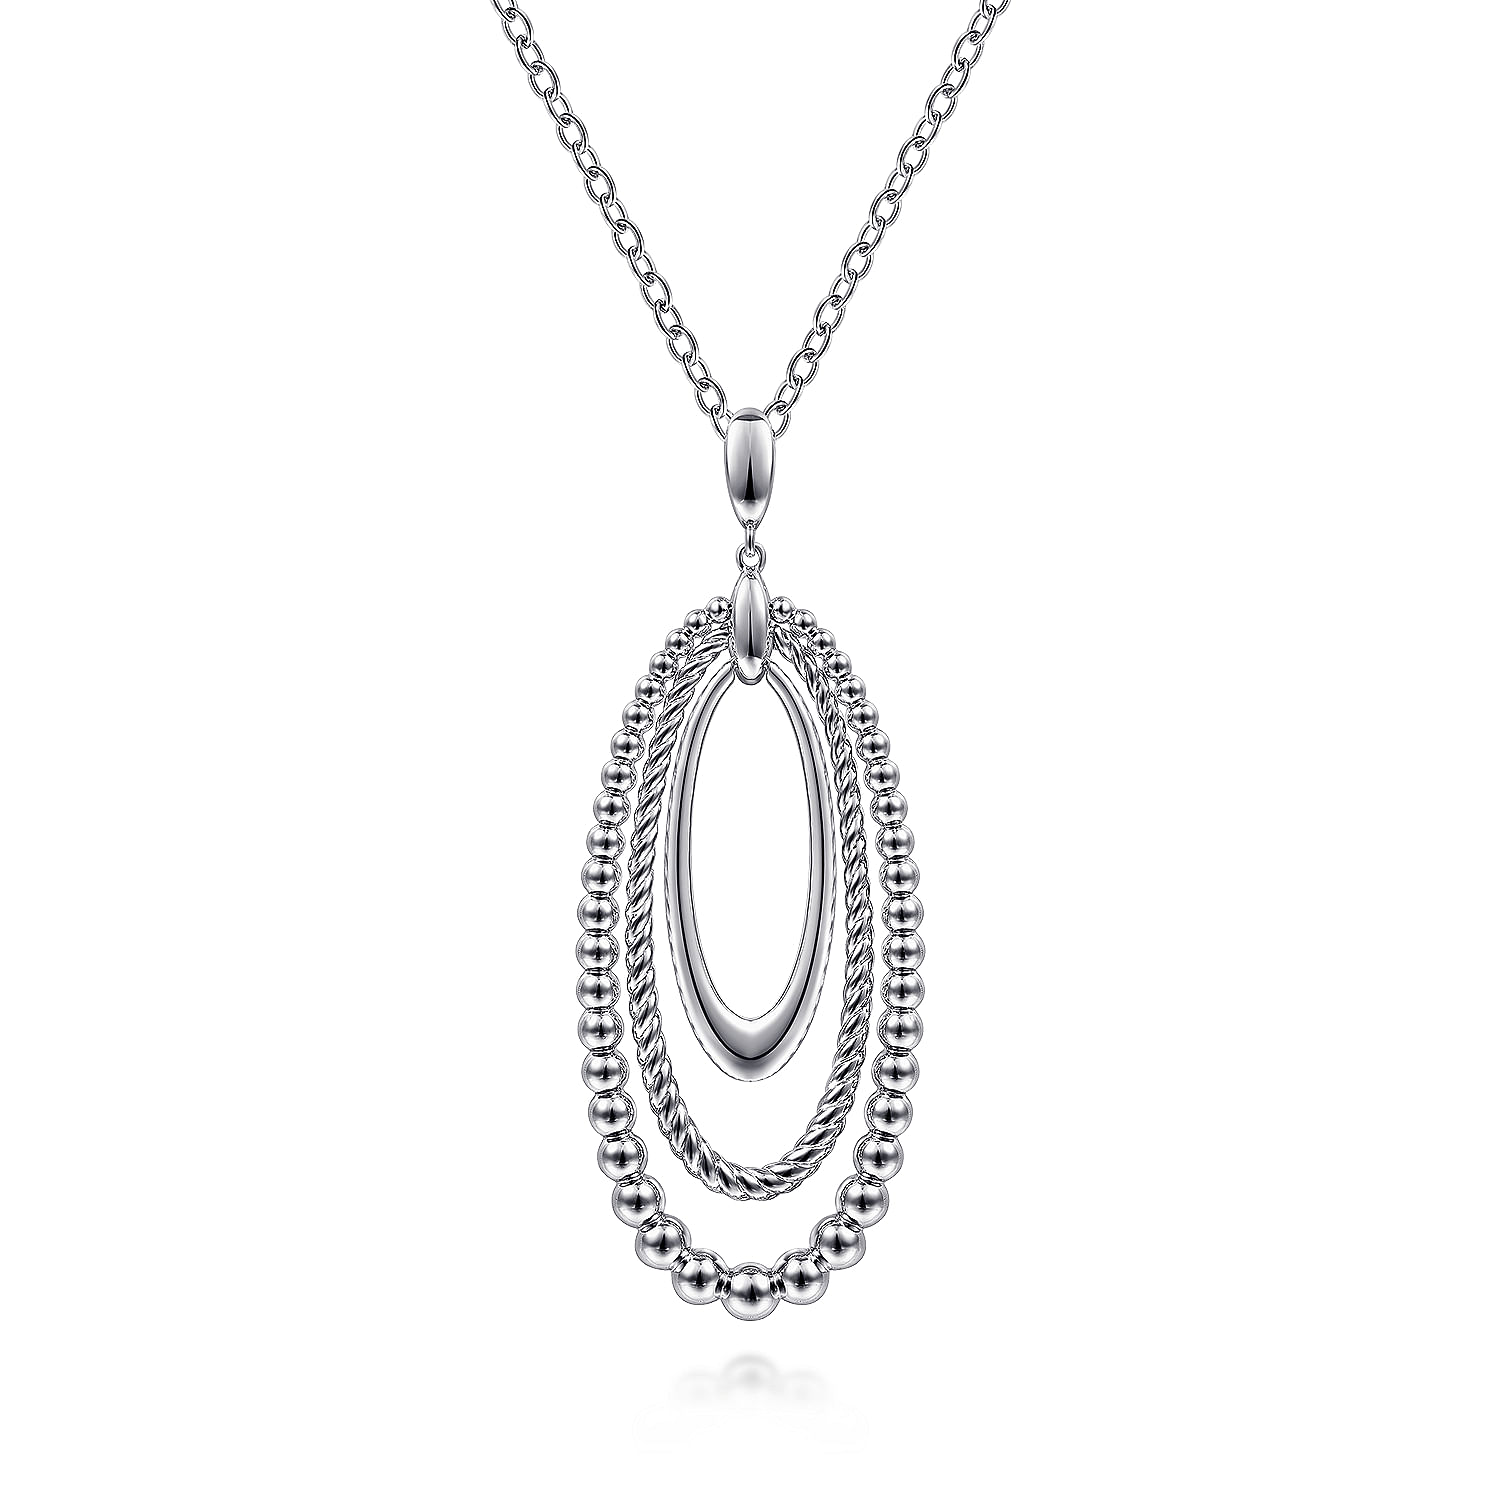 24 inch 925 Sterling Silver Pendant Necklace